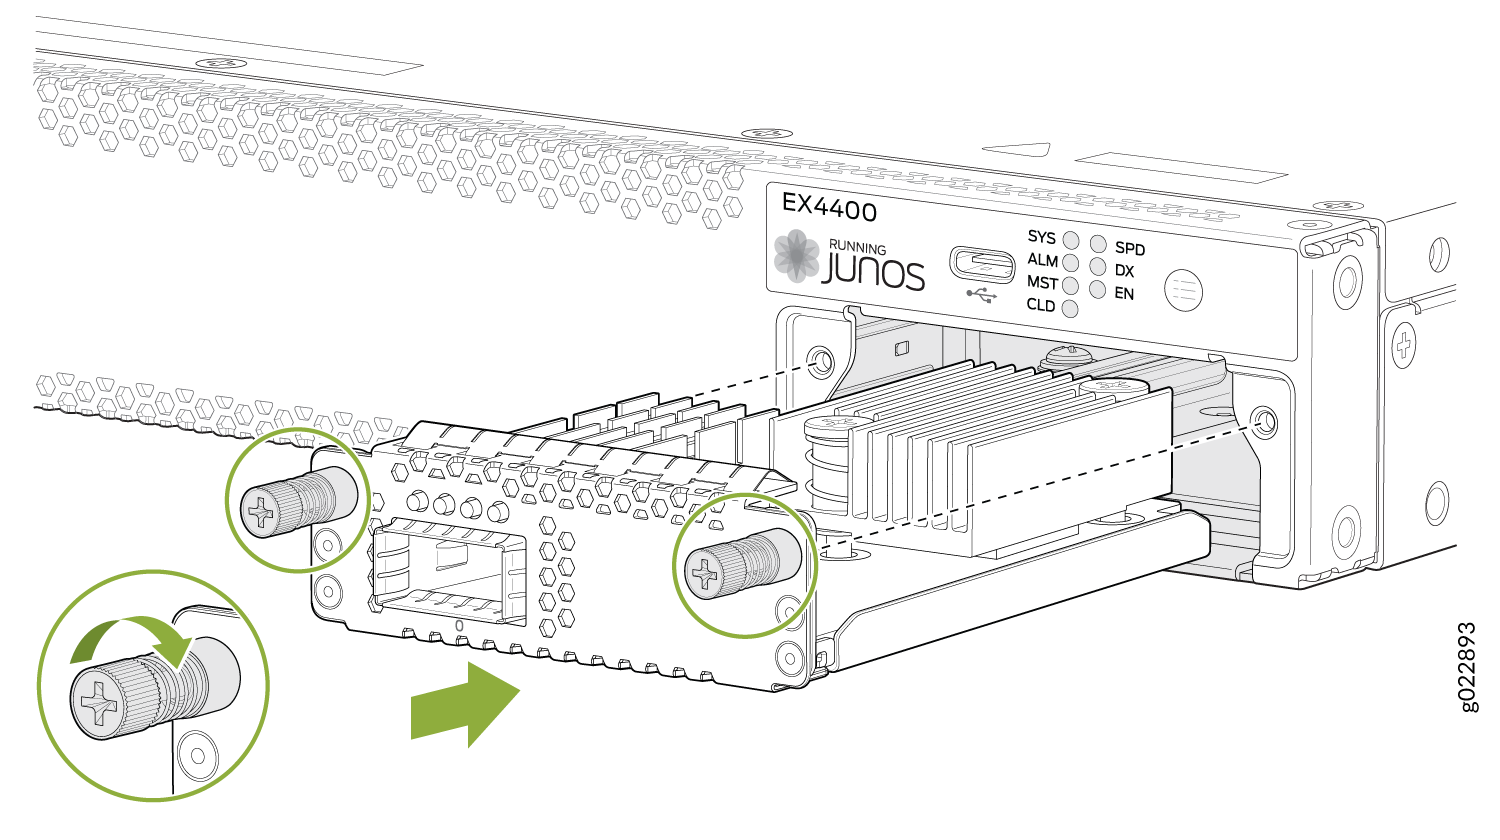 Install a 1x100GbE QSFP28 Extension Module in the EX4400 Switch